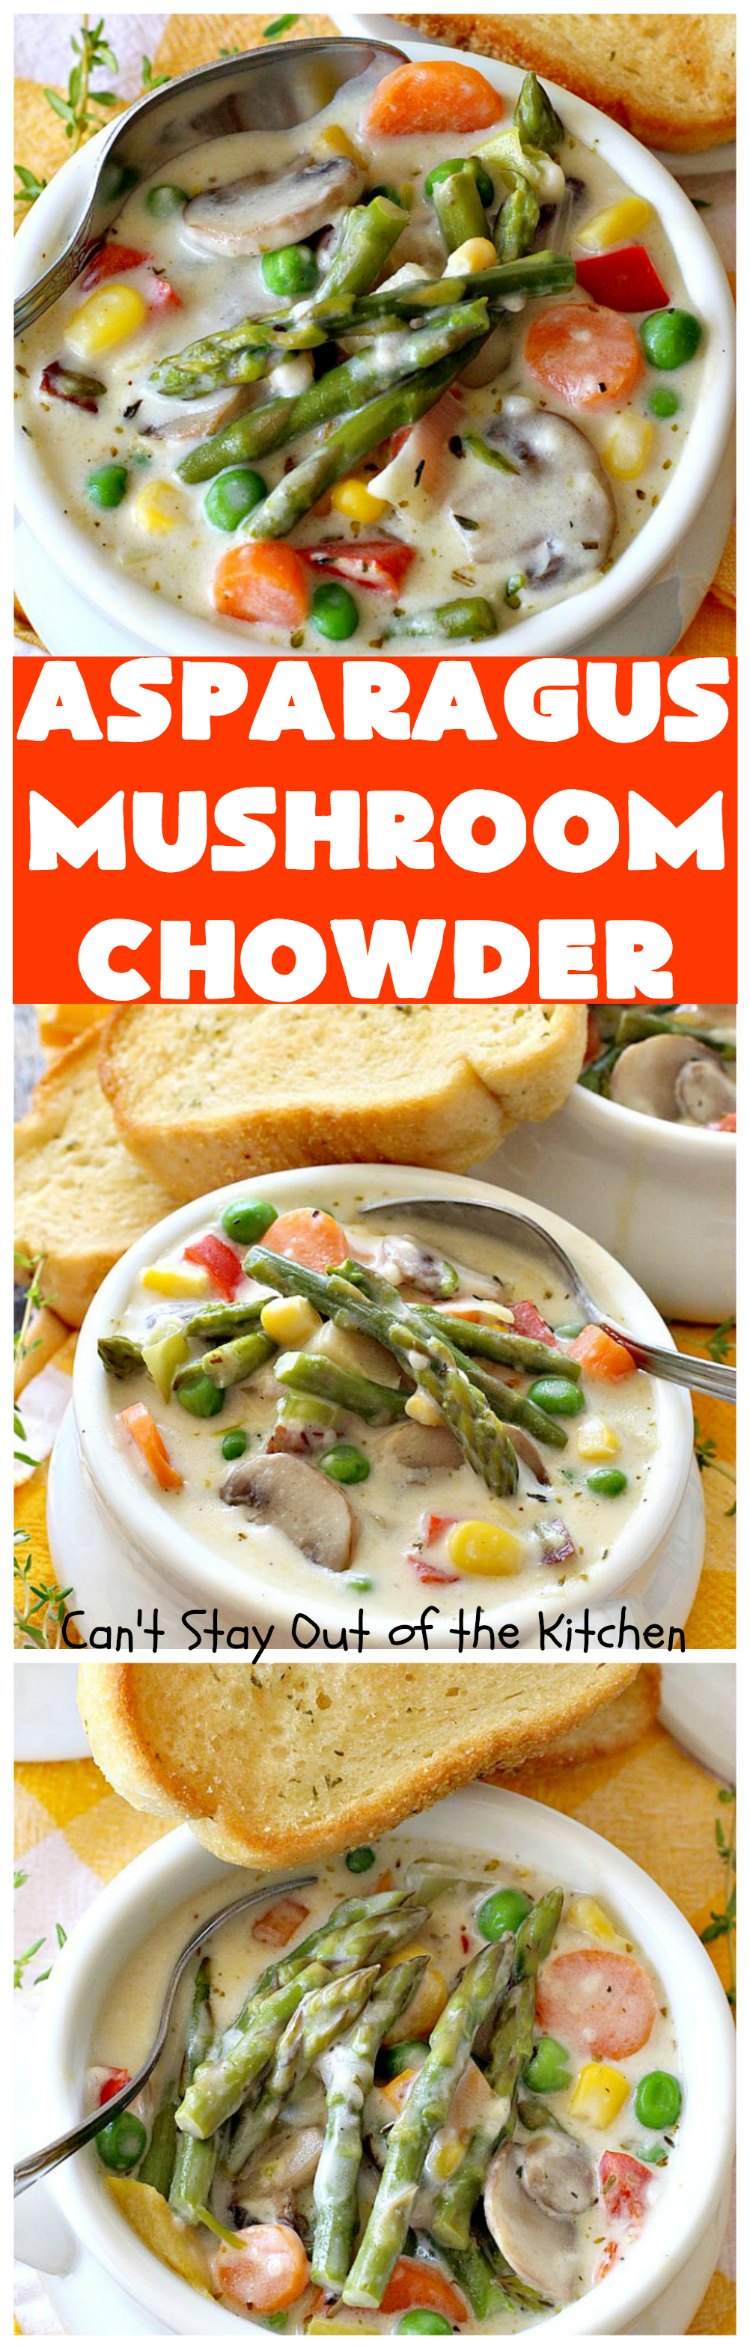 Asparagus Mushroom Chowder | Can't Stay Out of the Kitchen